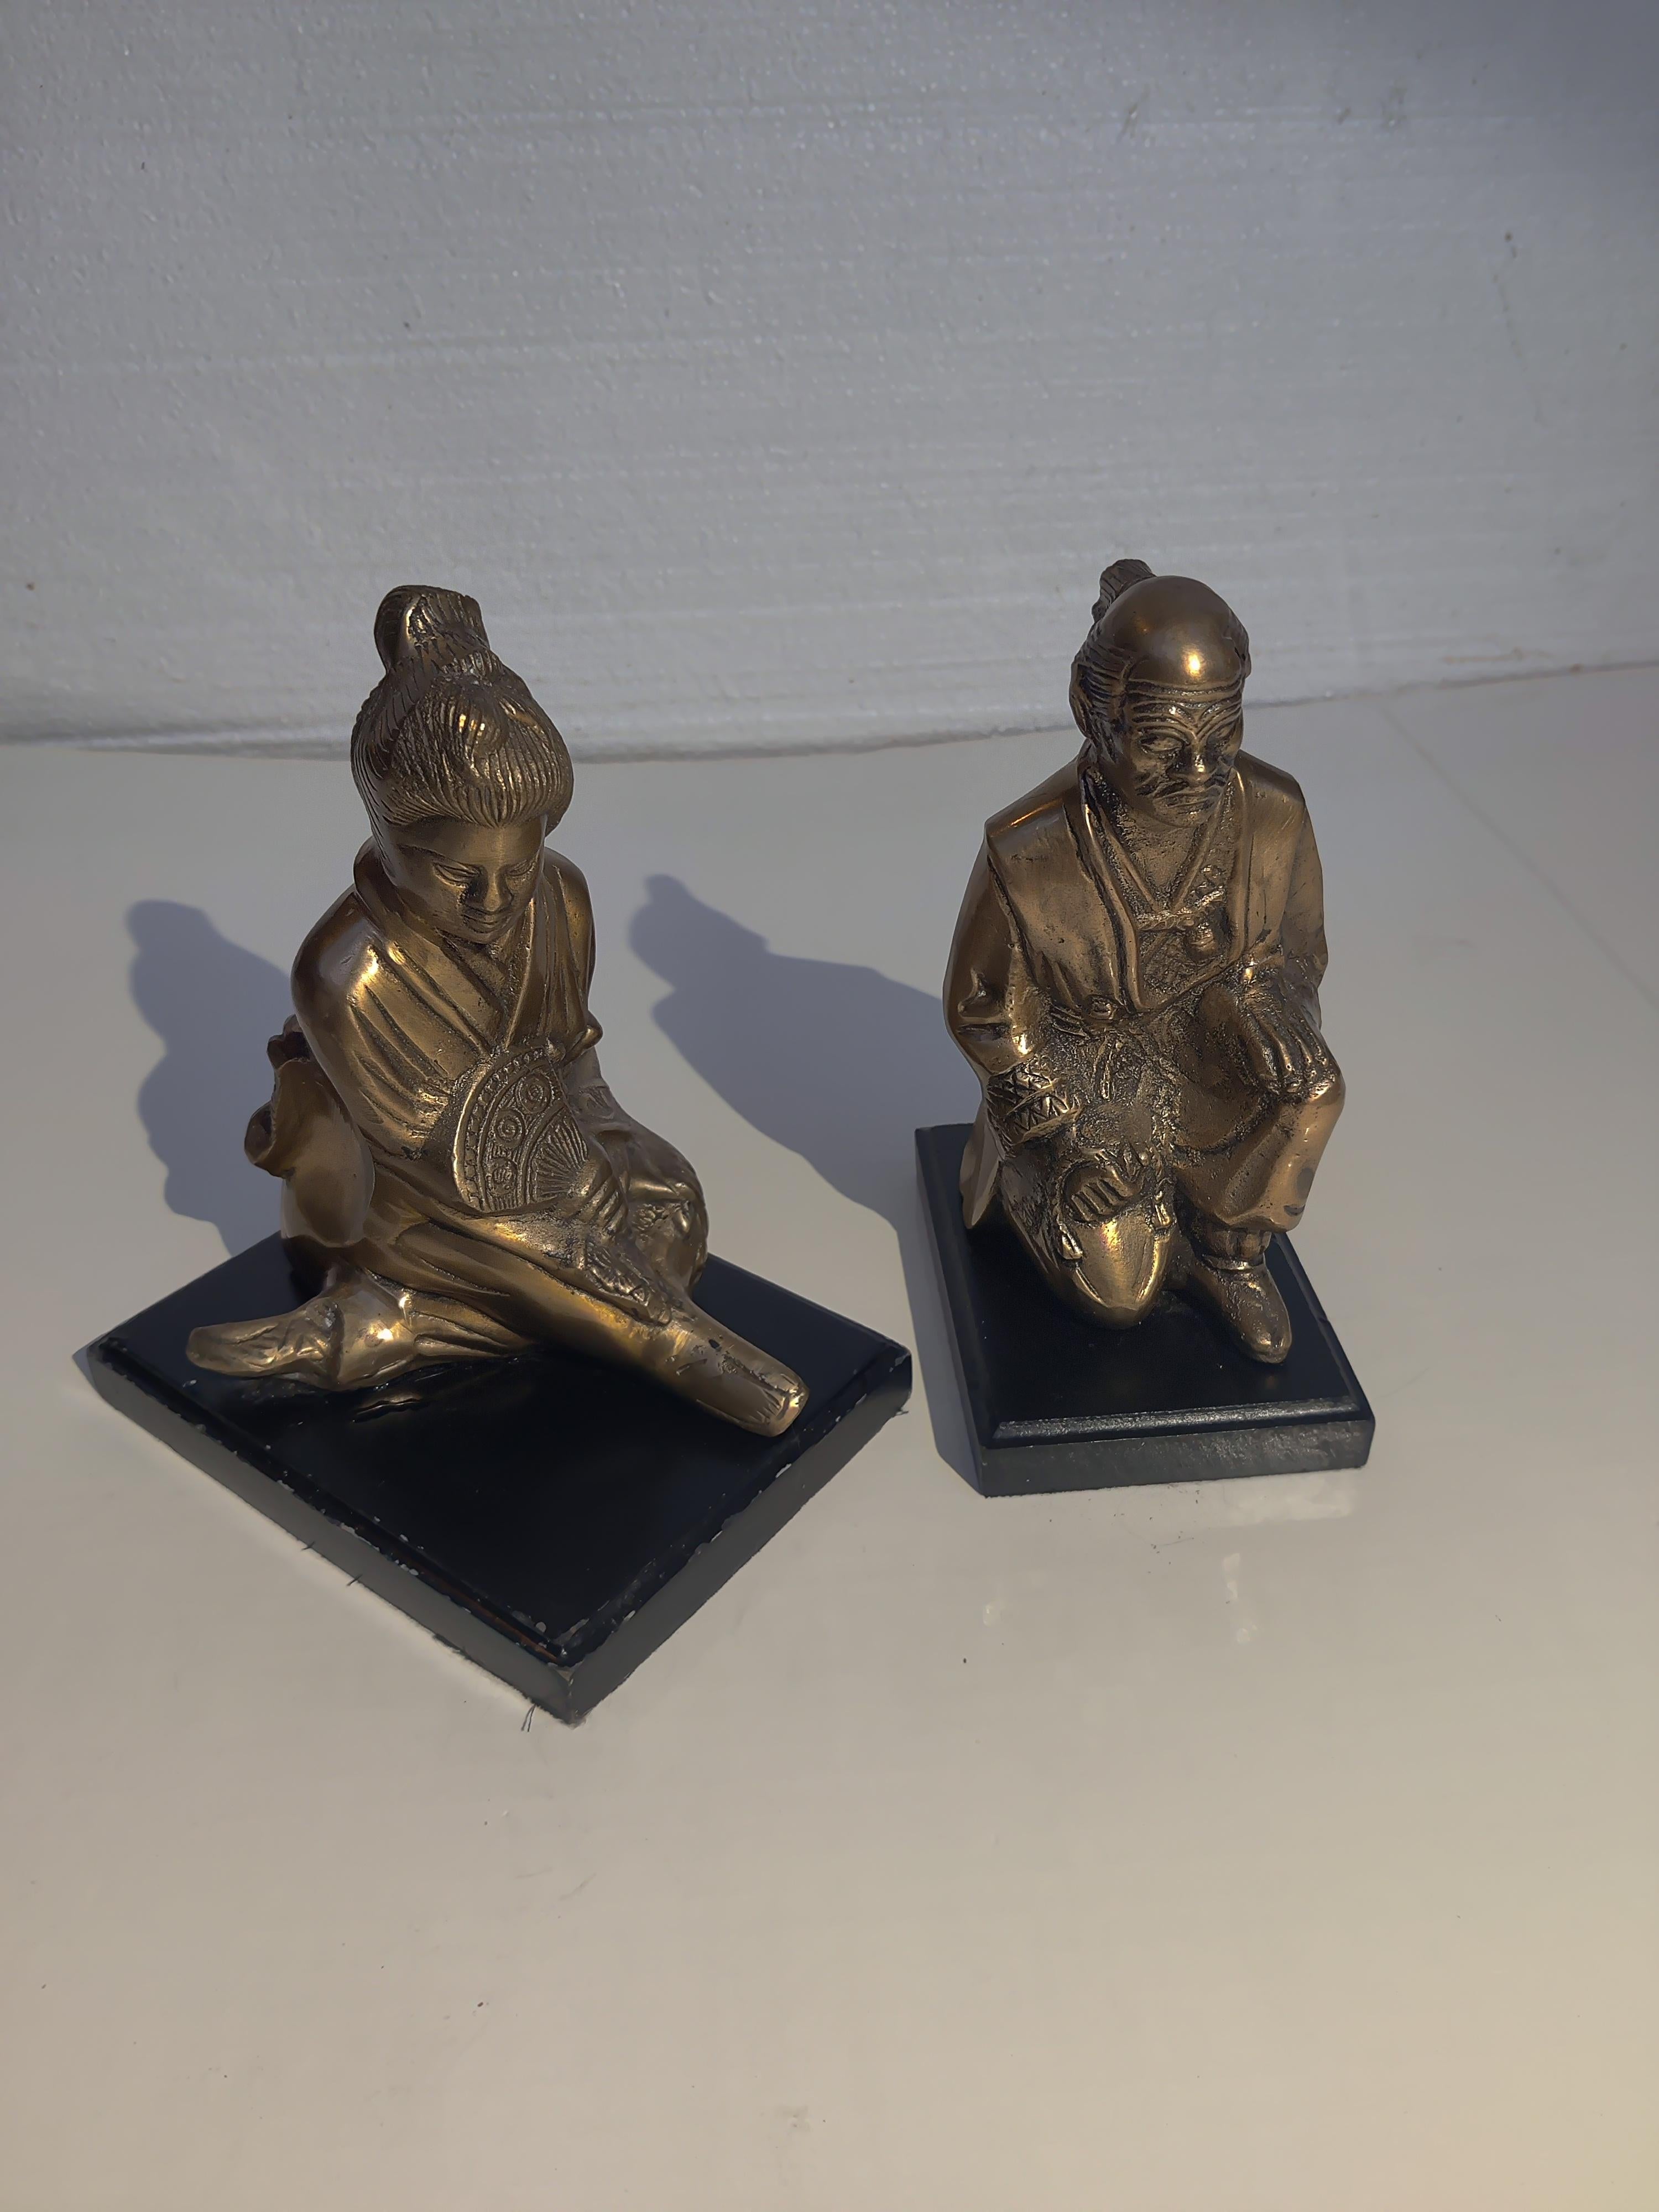 Brass and Wood Asian Bookends
Ceremony Position Asian Male and Geisha Female.
Some wear on wood black bases.
Male dimensions 7H x 4.5L x 2.5W.   Wood base 5 x 3.5.
Female dimensions 7H x  5.5L x 4W.  Wood base 6.5 x 4.75.
